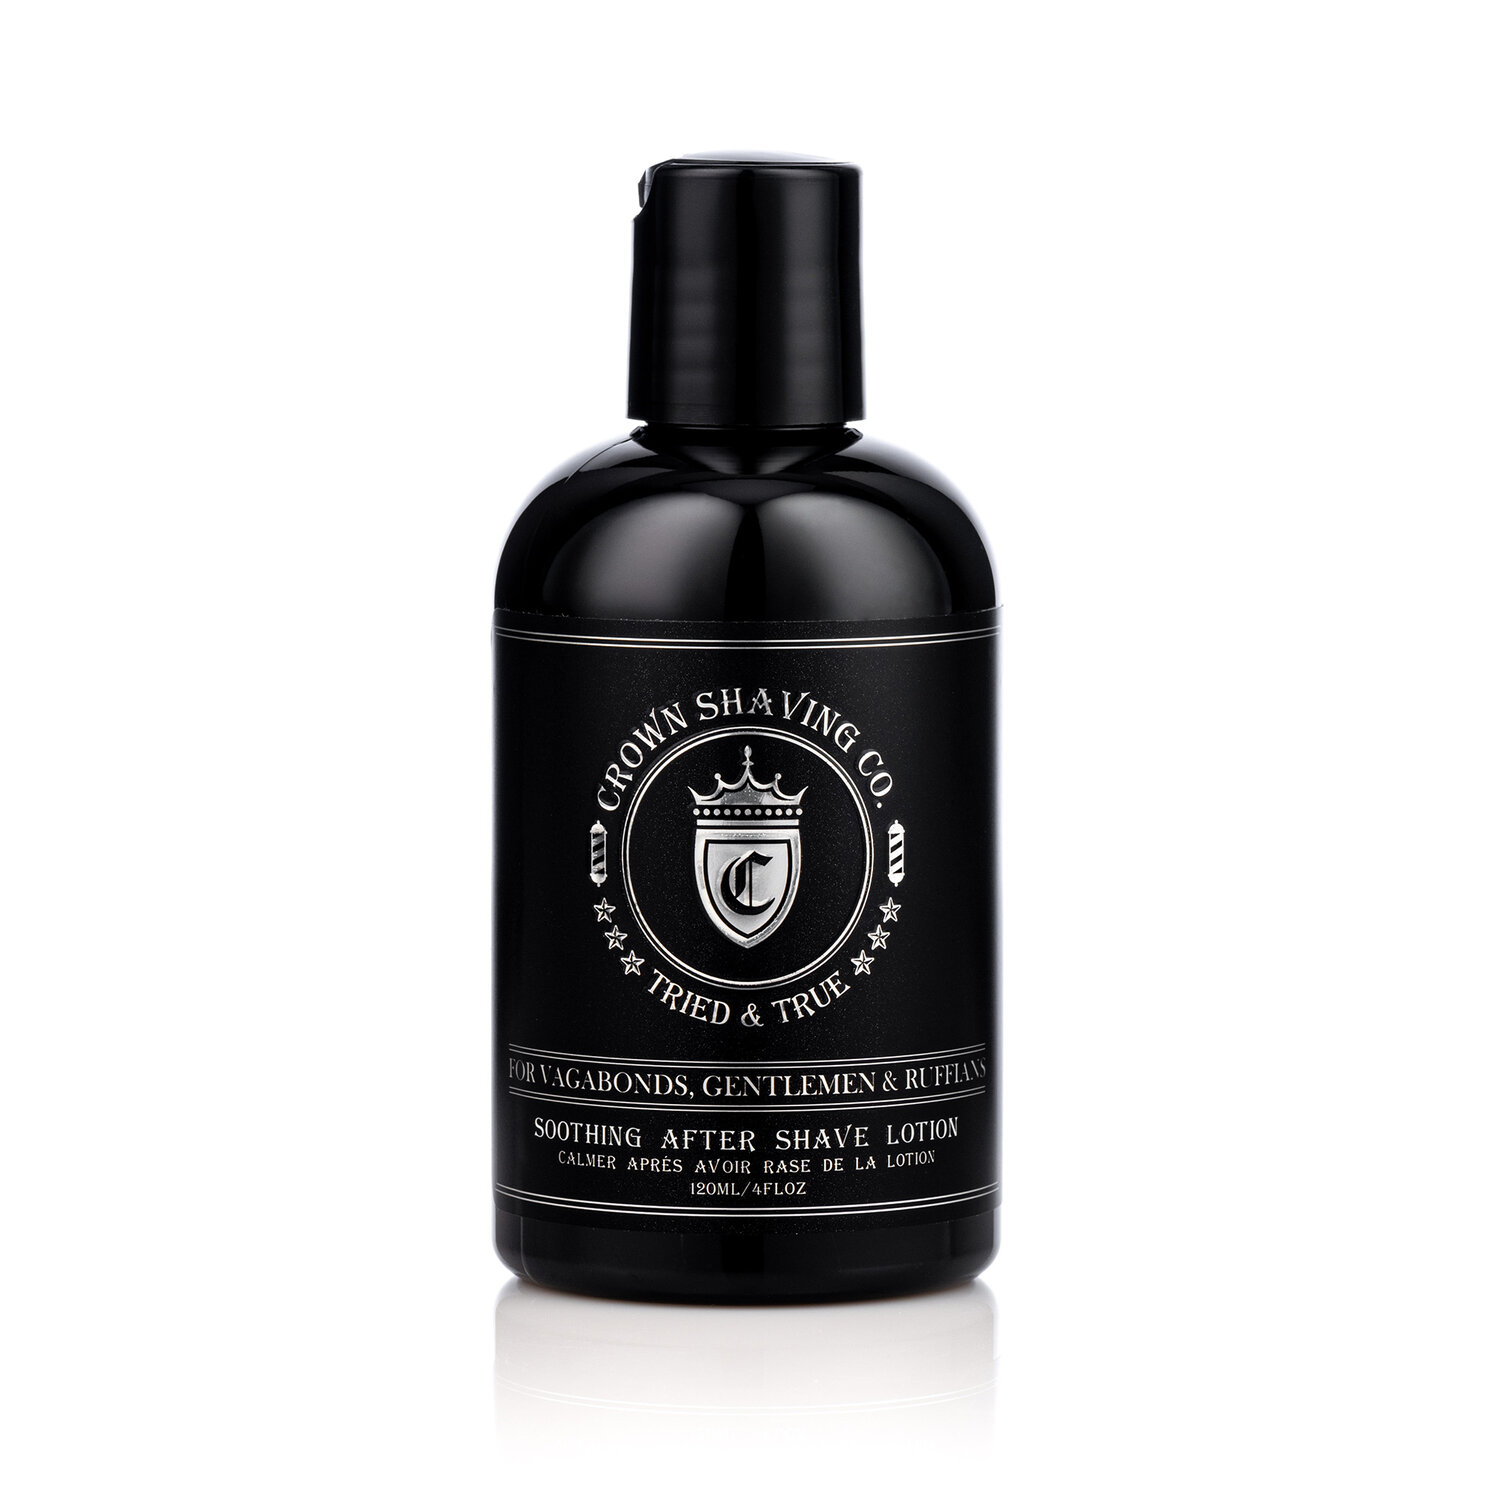 Soothing After Shave Lotion 120 ml/4 fl oz. — Crown Shaving Co